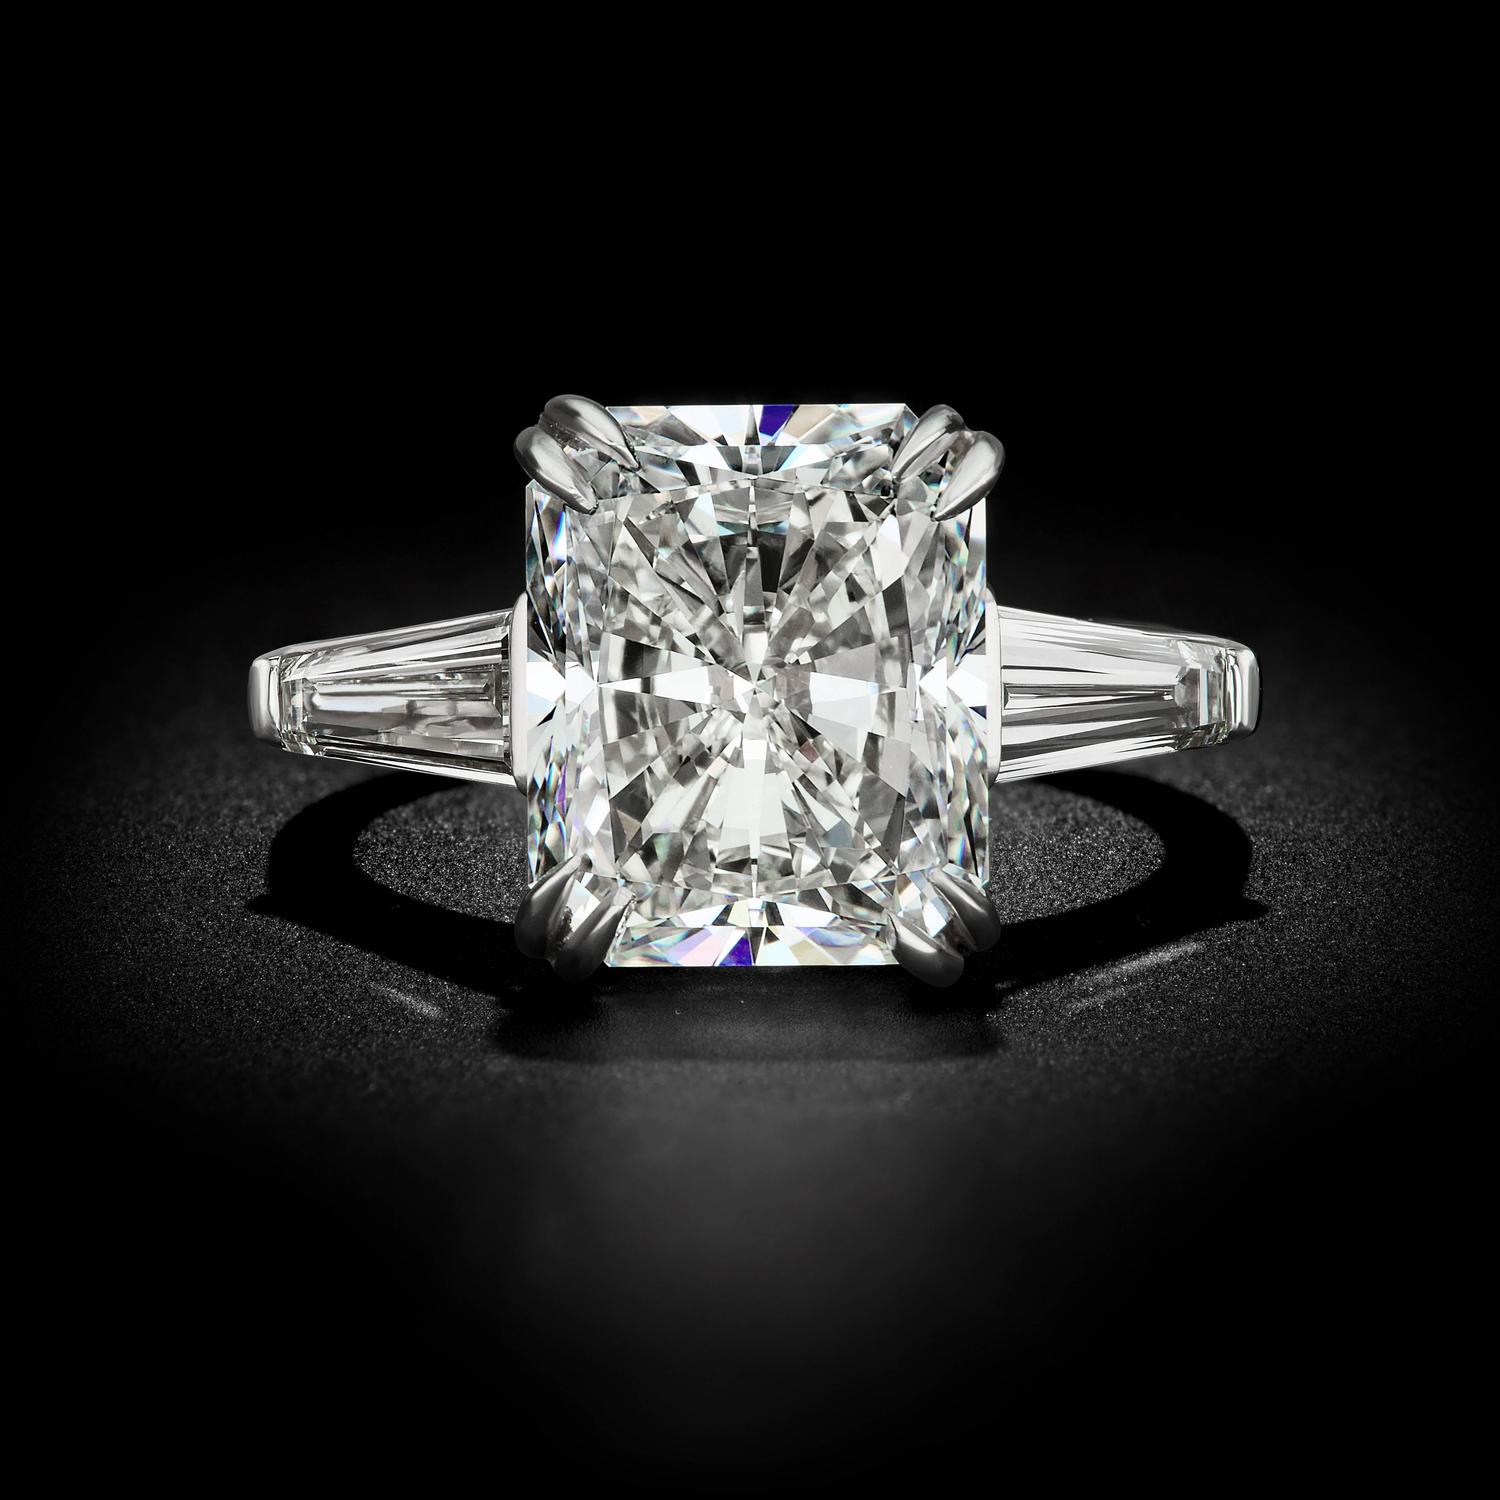 6.05 Carat Radiant Cut Diamond Ring For Sale at 1stdibs